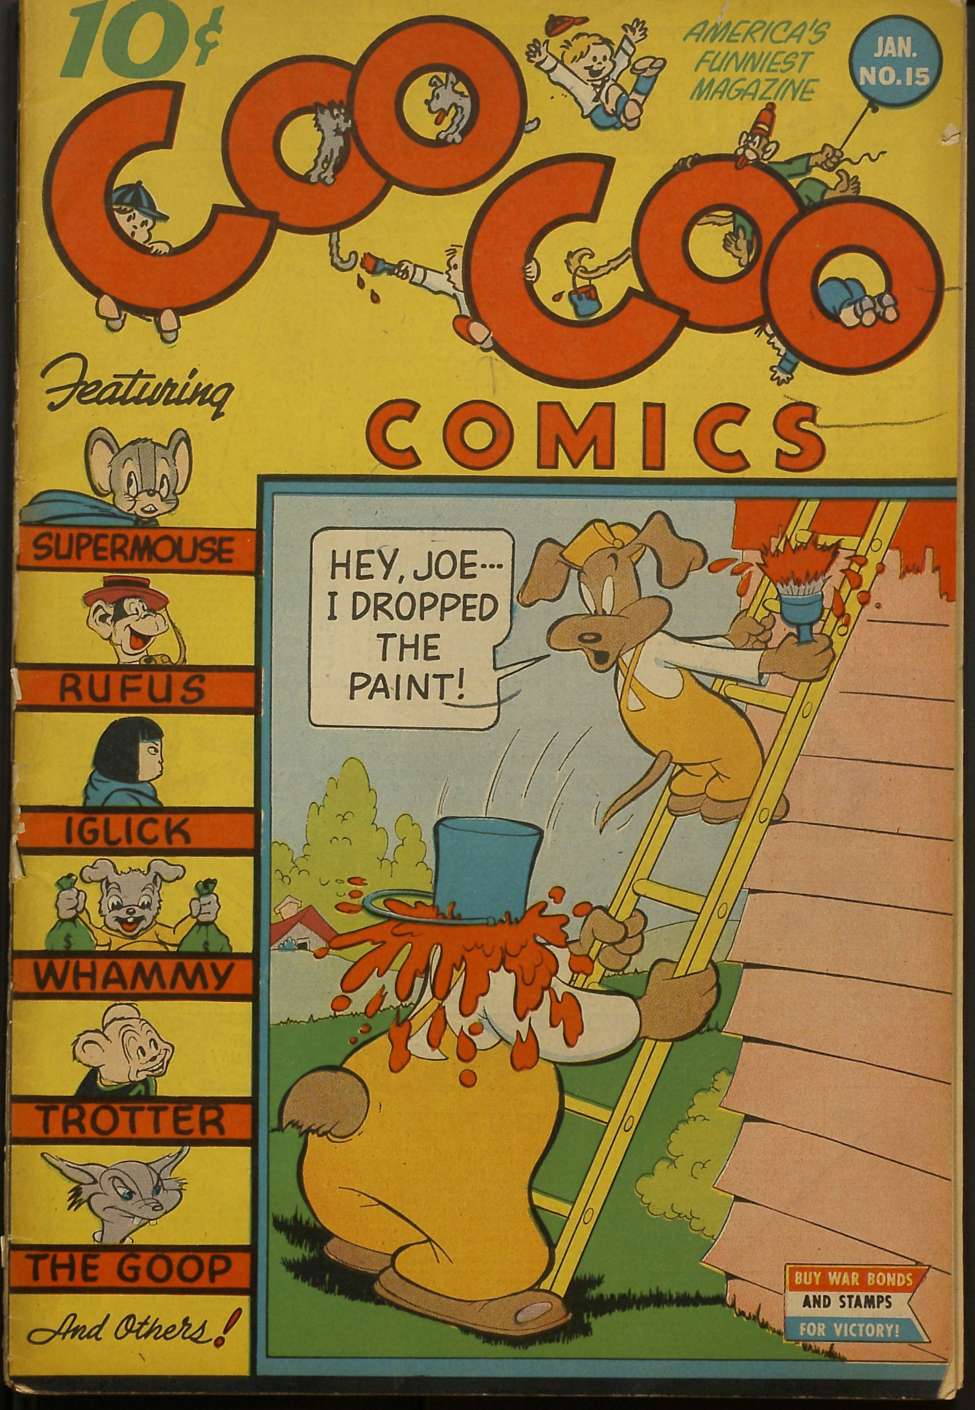 Comic Book Cover For Coo Coo Comics 15 (alt) - Version 2